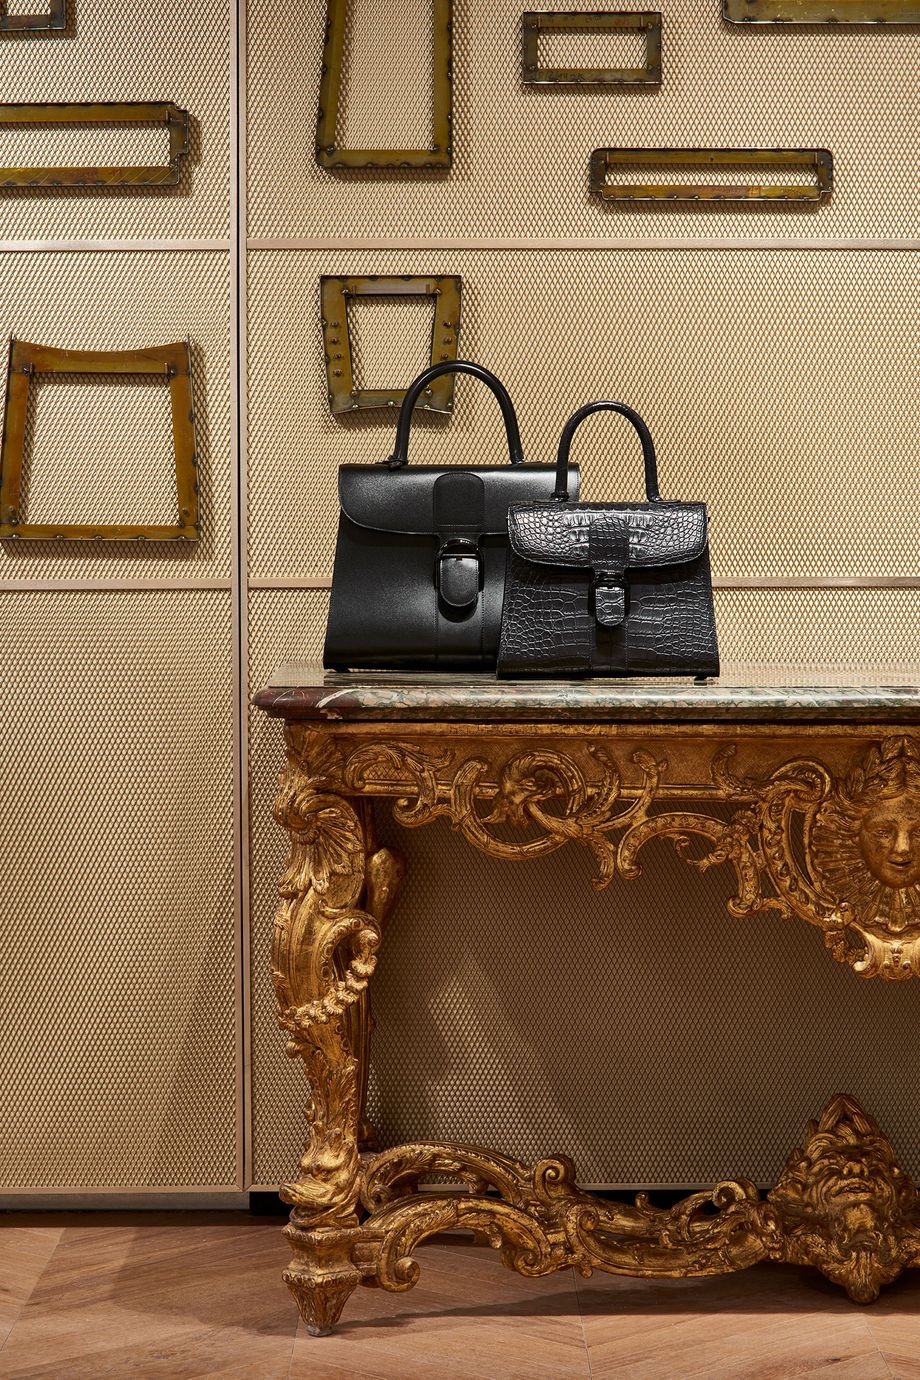 Did you know that Delvaux is the oldest luxury leather goods